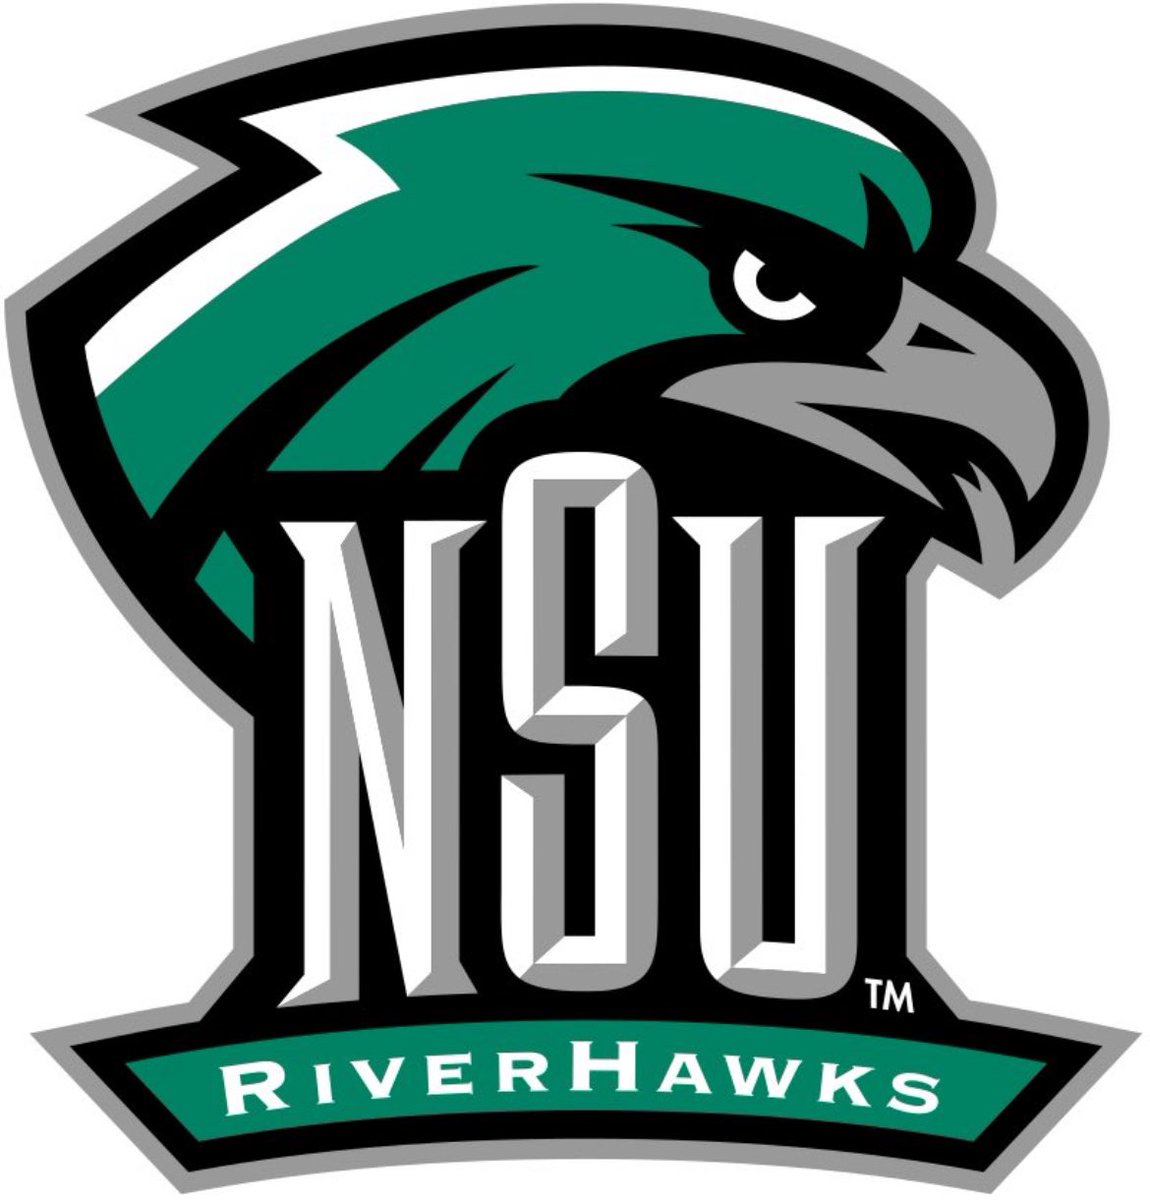 Blessed to receive an offer from Northeastern state University🙏🏽 @CoachChev6 @TheCoachNWard @Coach_D_Wynn @RecruitTheHill1